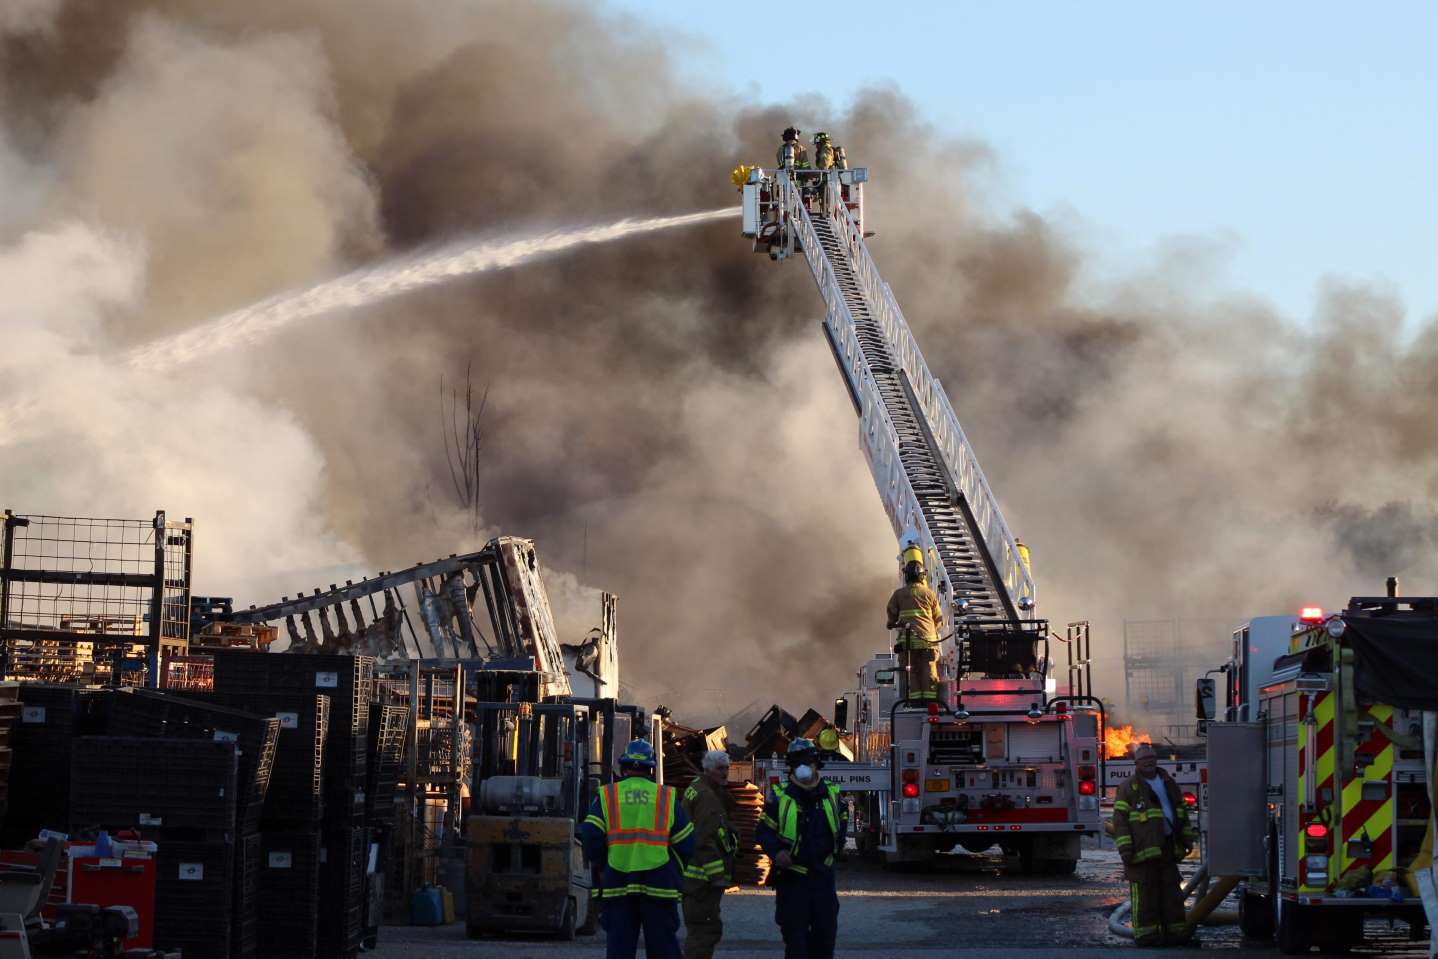 pallet fire in compton